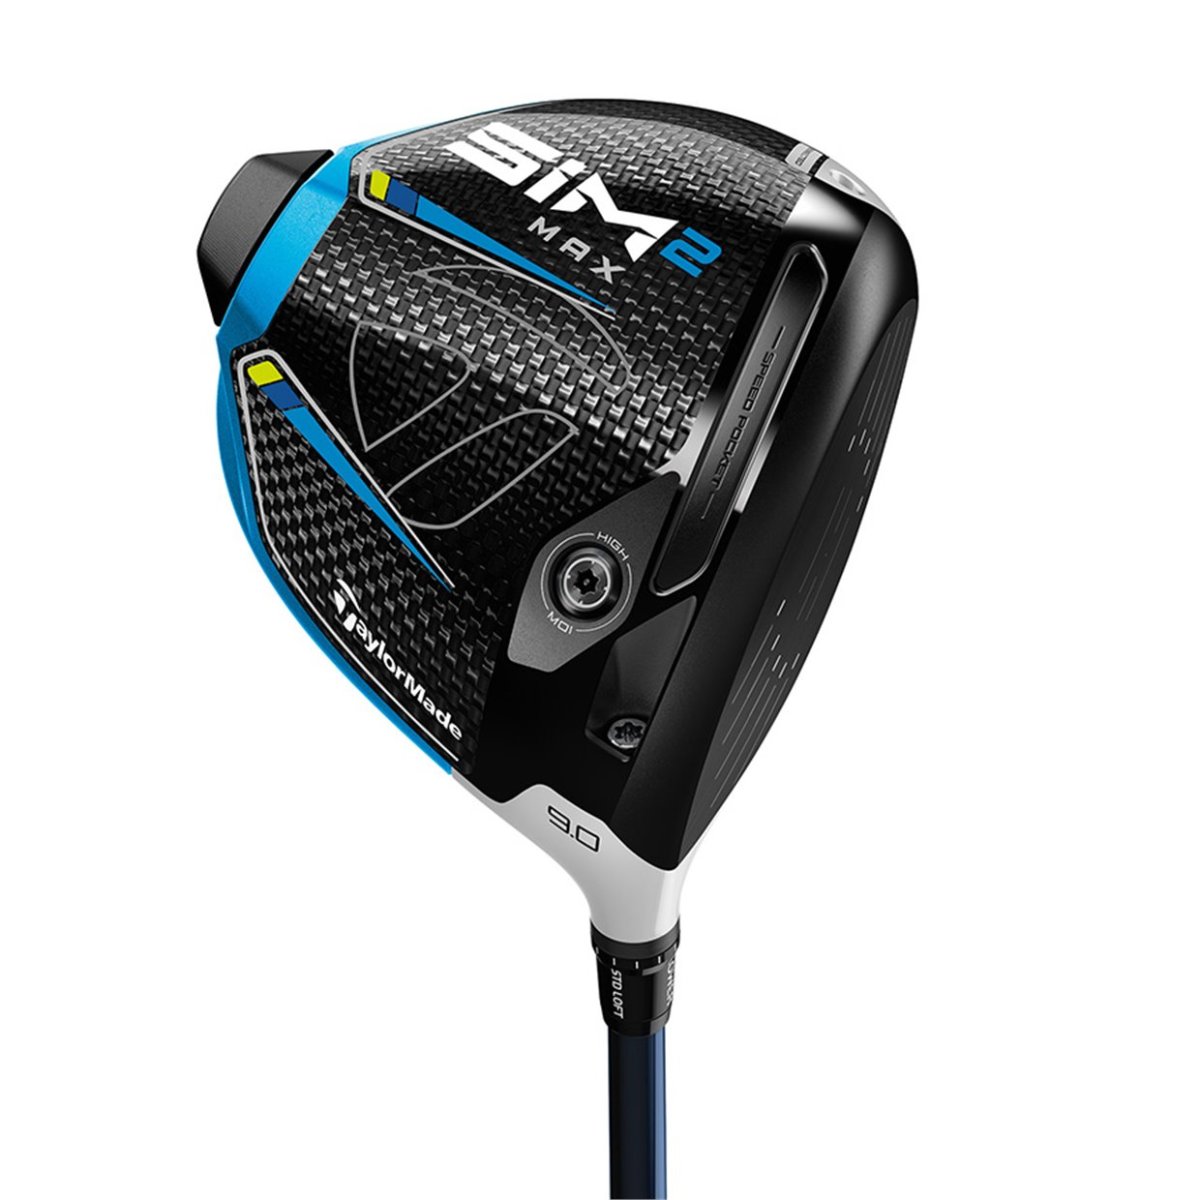 Shop the latest TaylorMade drivers - like the SIM2 MAX - on Morning Read's online pro shop.